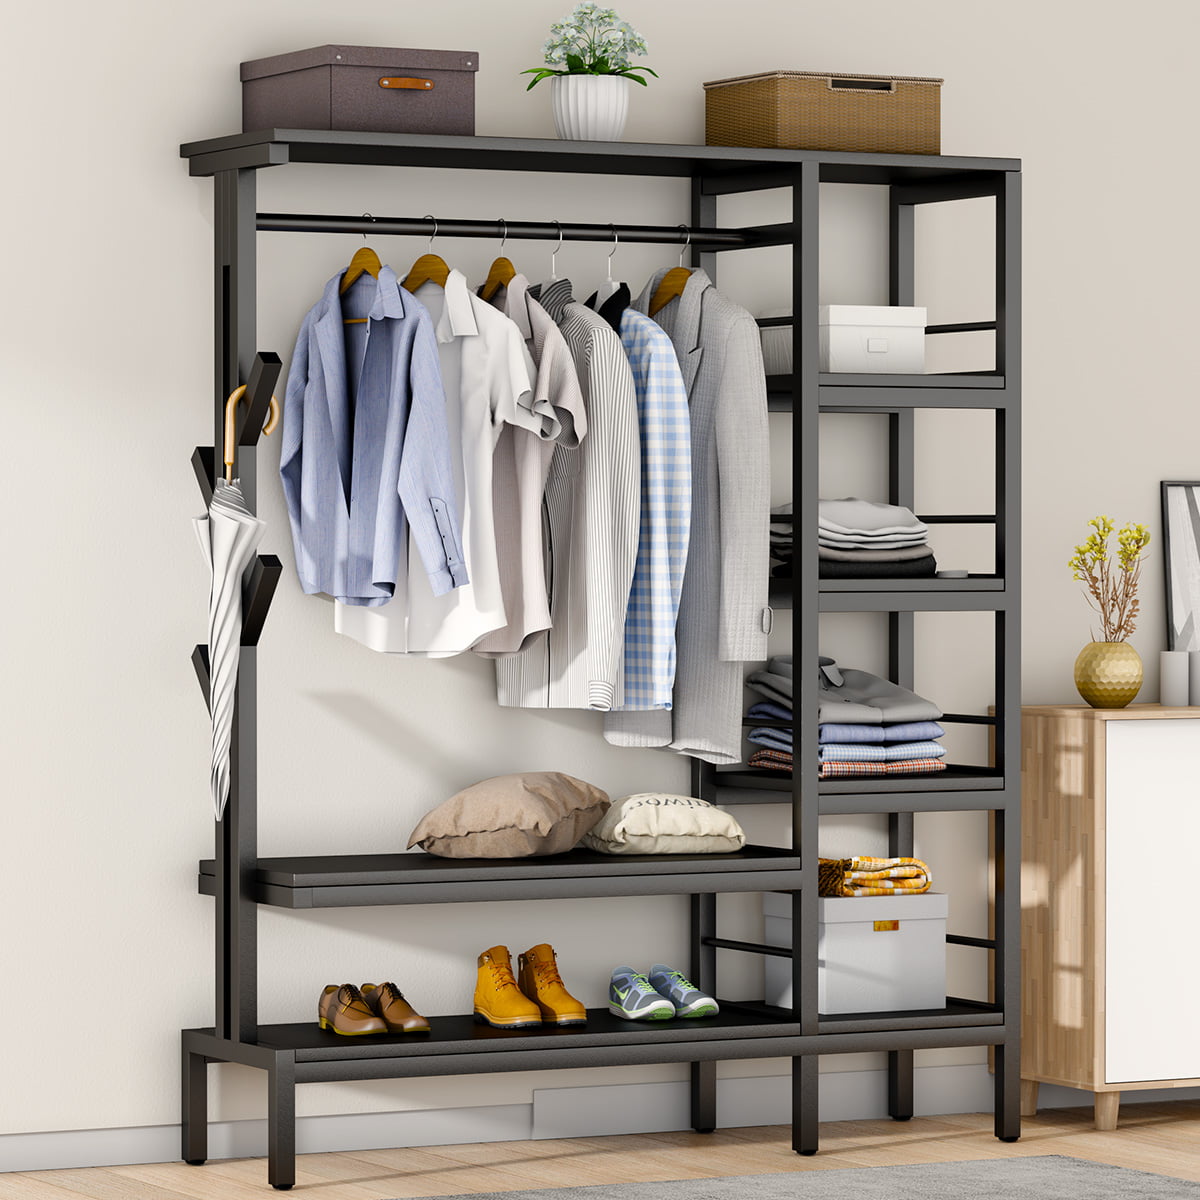 Grey For Nappies and Baby Items mDesign Hanging Wardrobe Organiser 7 Shelves & 3 Drawers Ideal Hanging Clothes Storage Made of Fabric Material Suitable as Hanging Storage Baskets in the Hall 